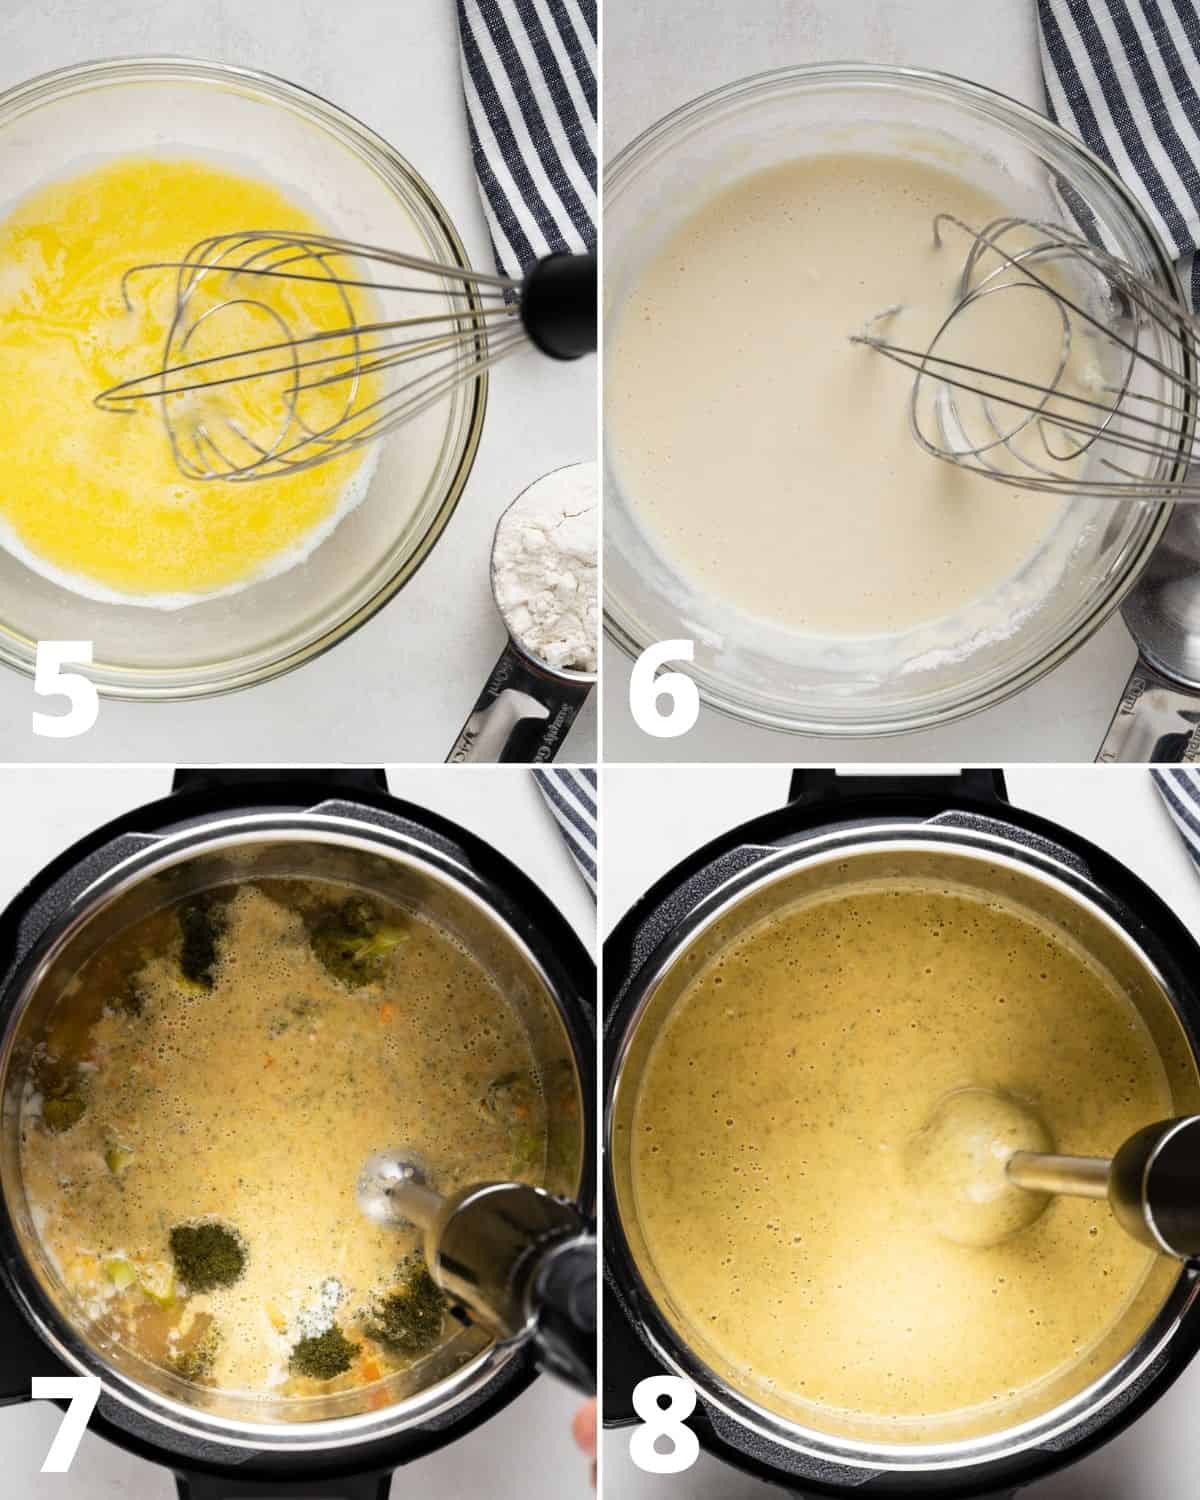 Steps to make Broccoli Cheddar Soup in the Instant Pot